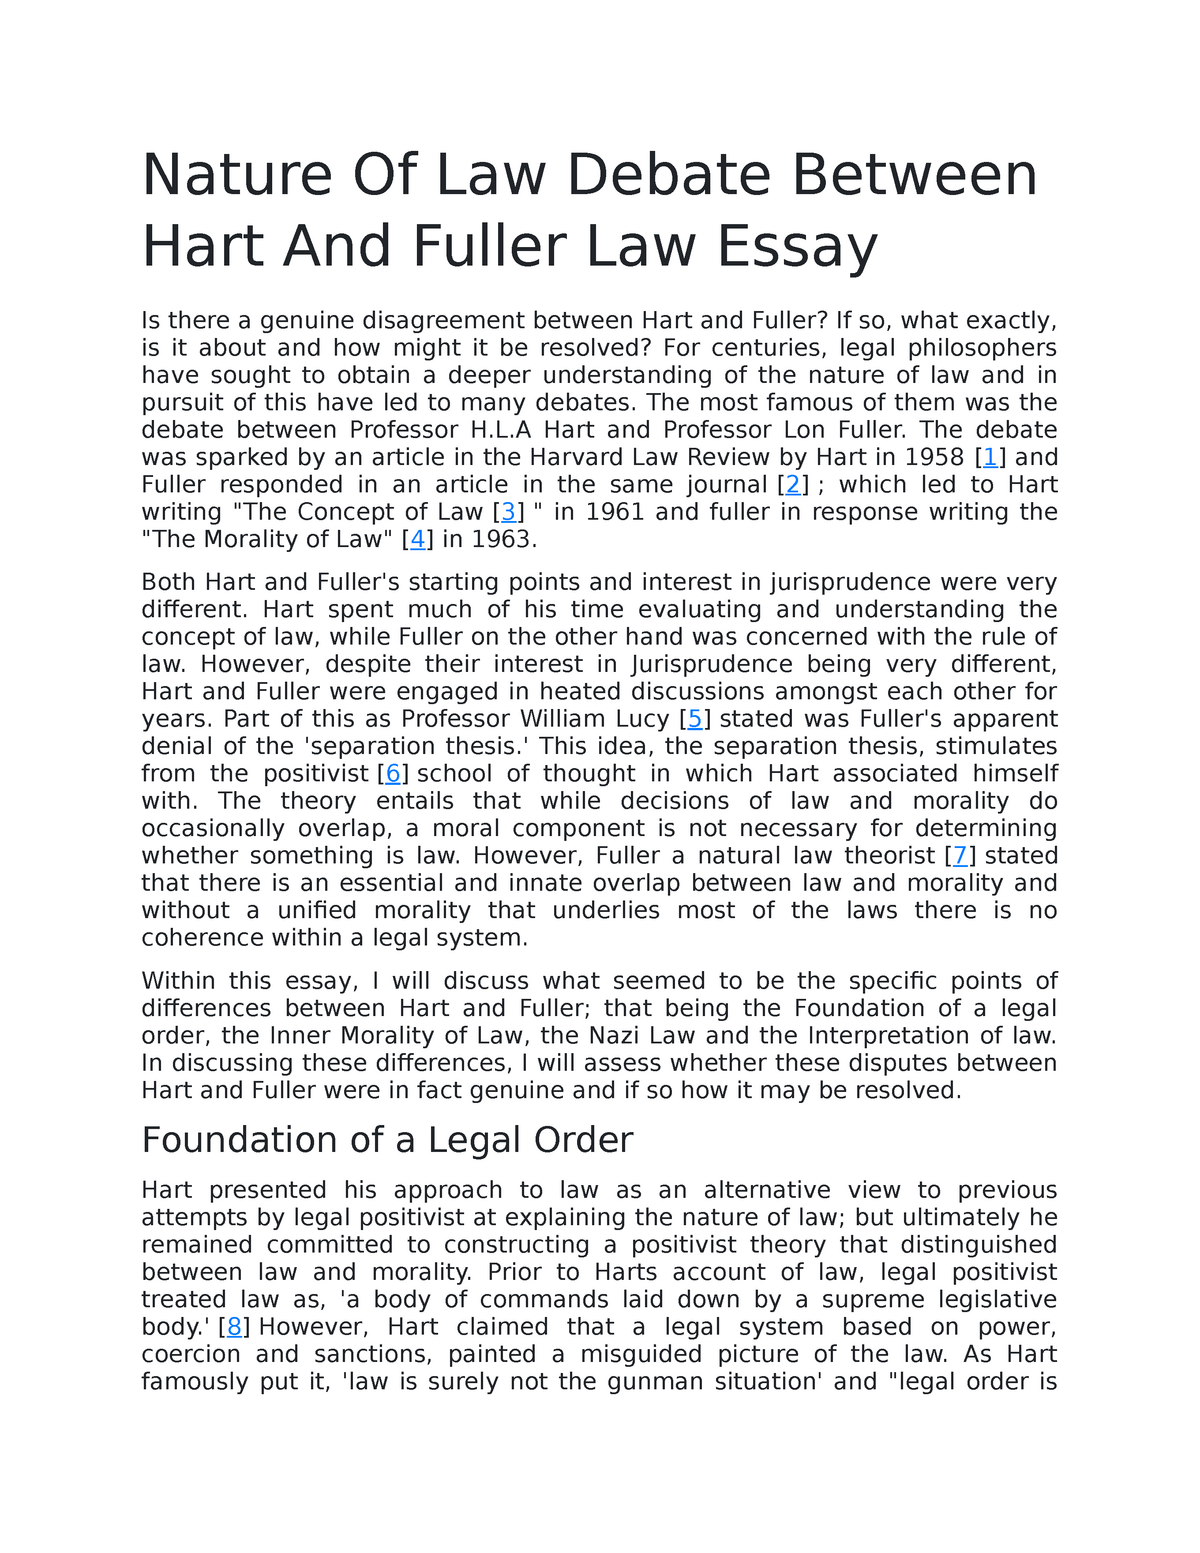 essays on nature of law